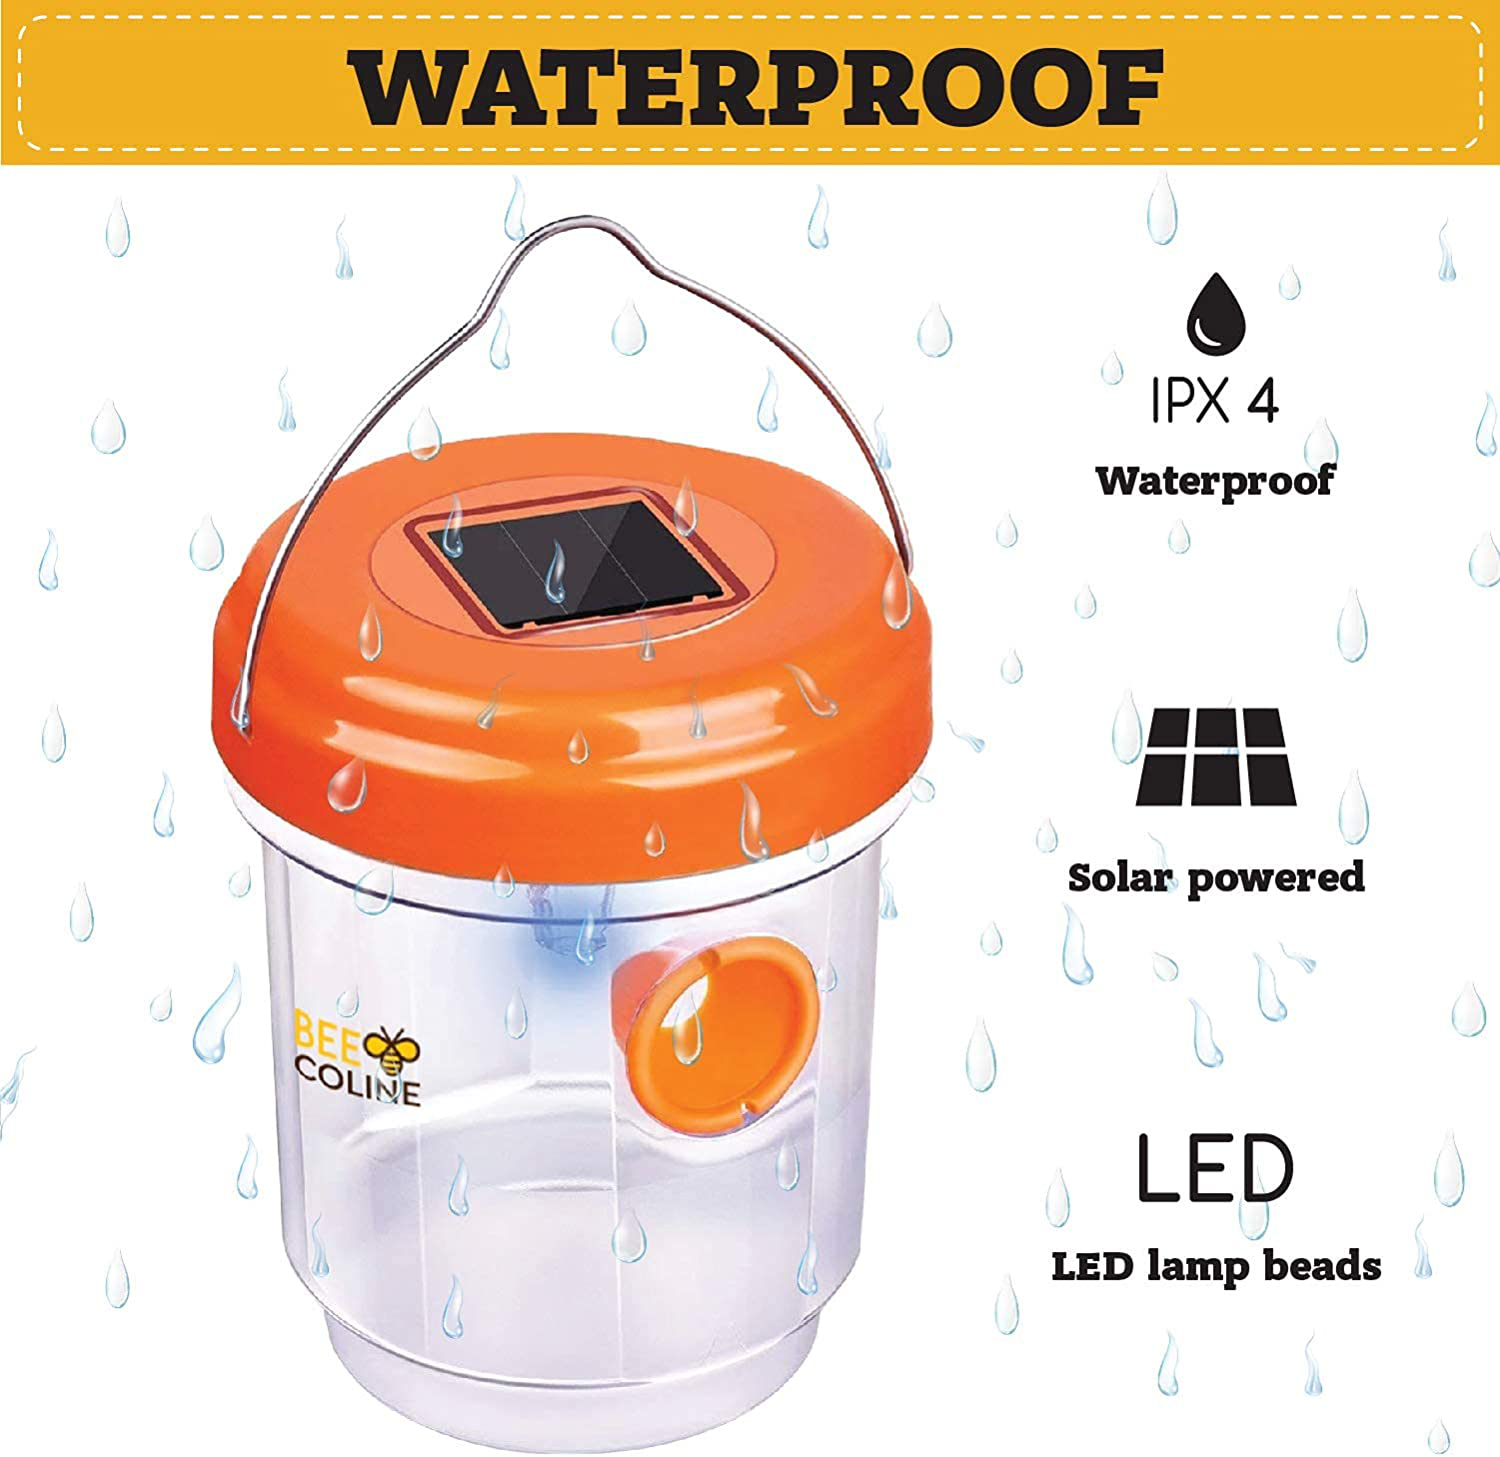 BEE Coline Wasp Trap - Wasp Killer 2 Packs - Fruit Fly Trap for Wasp, Bee, Gnats, Hornets and Flying Insect - Solar Powered Panel Bee Trap Outdoor